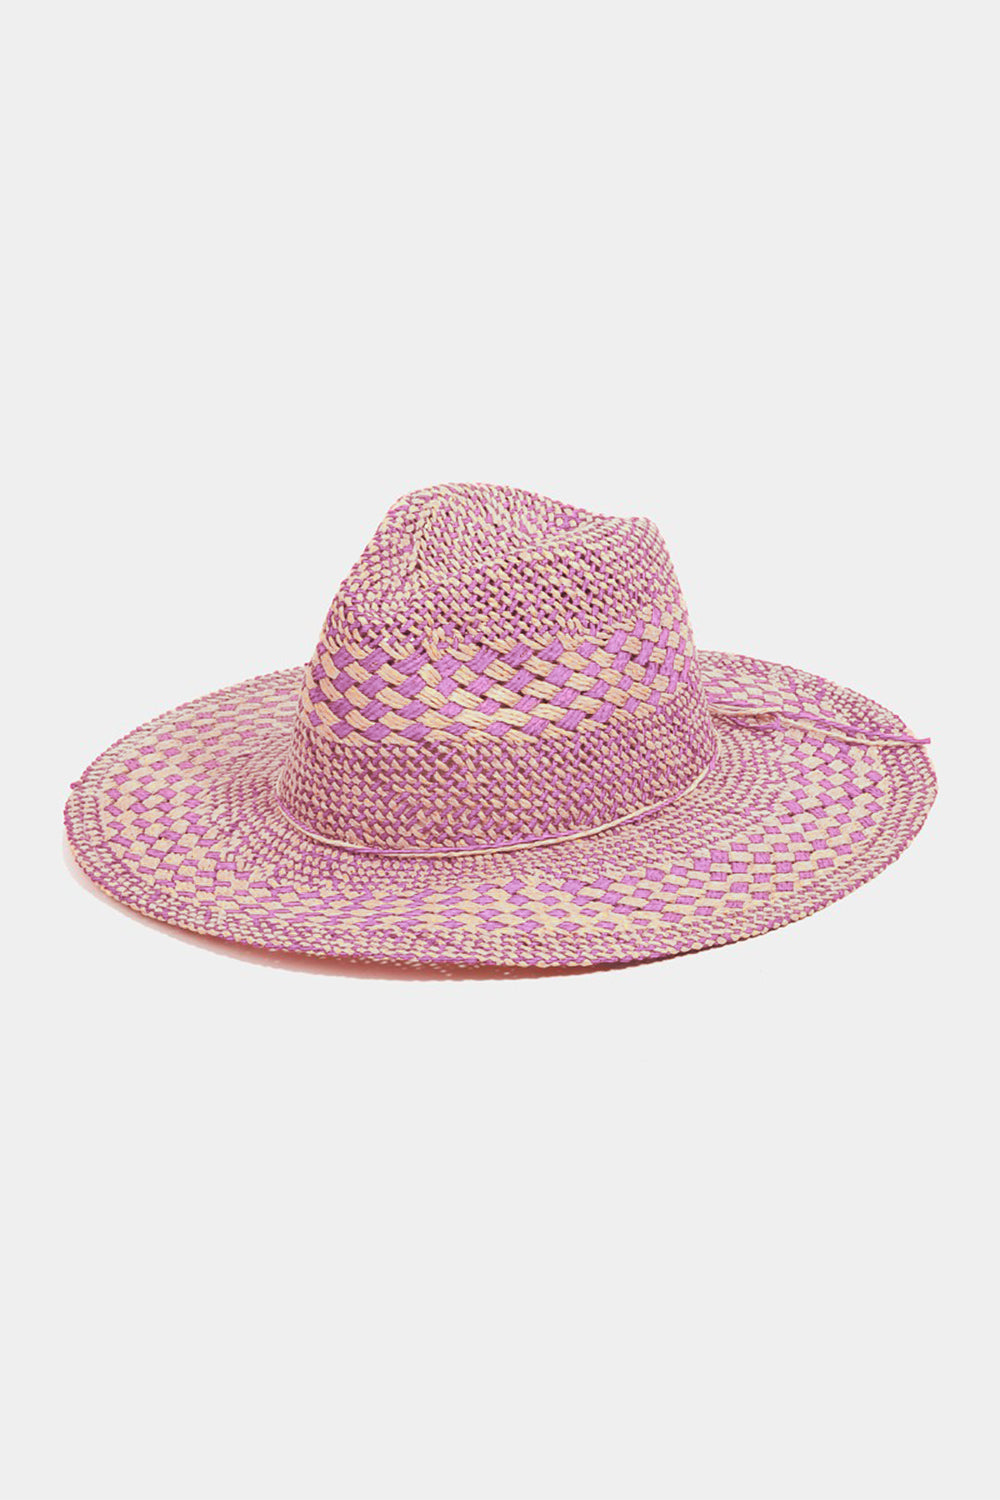 Fame Checkered Straw Weave Sun Hat | us.meeeshop